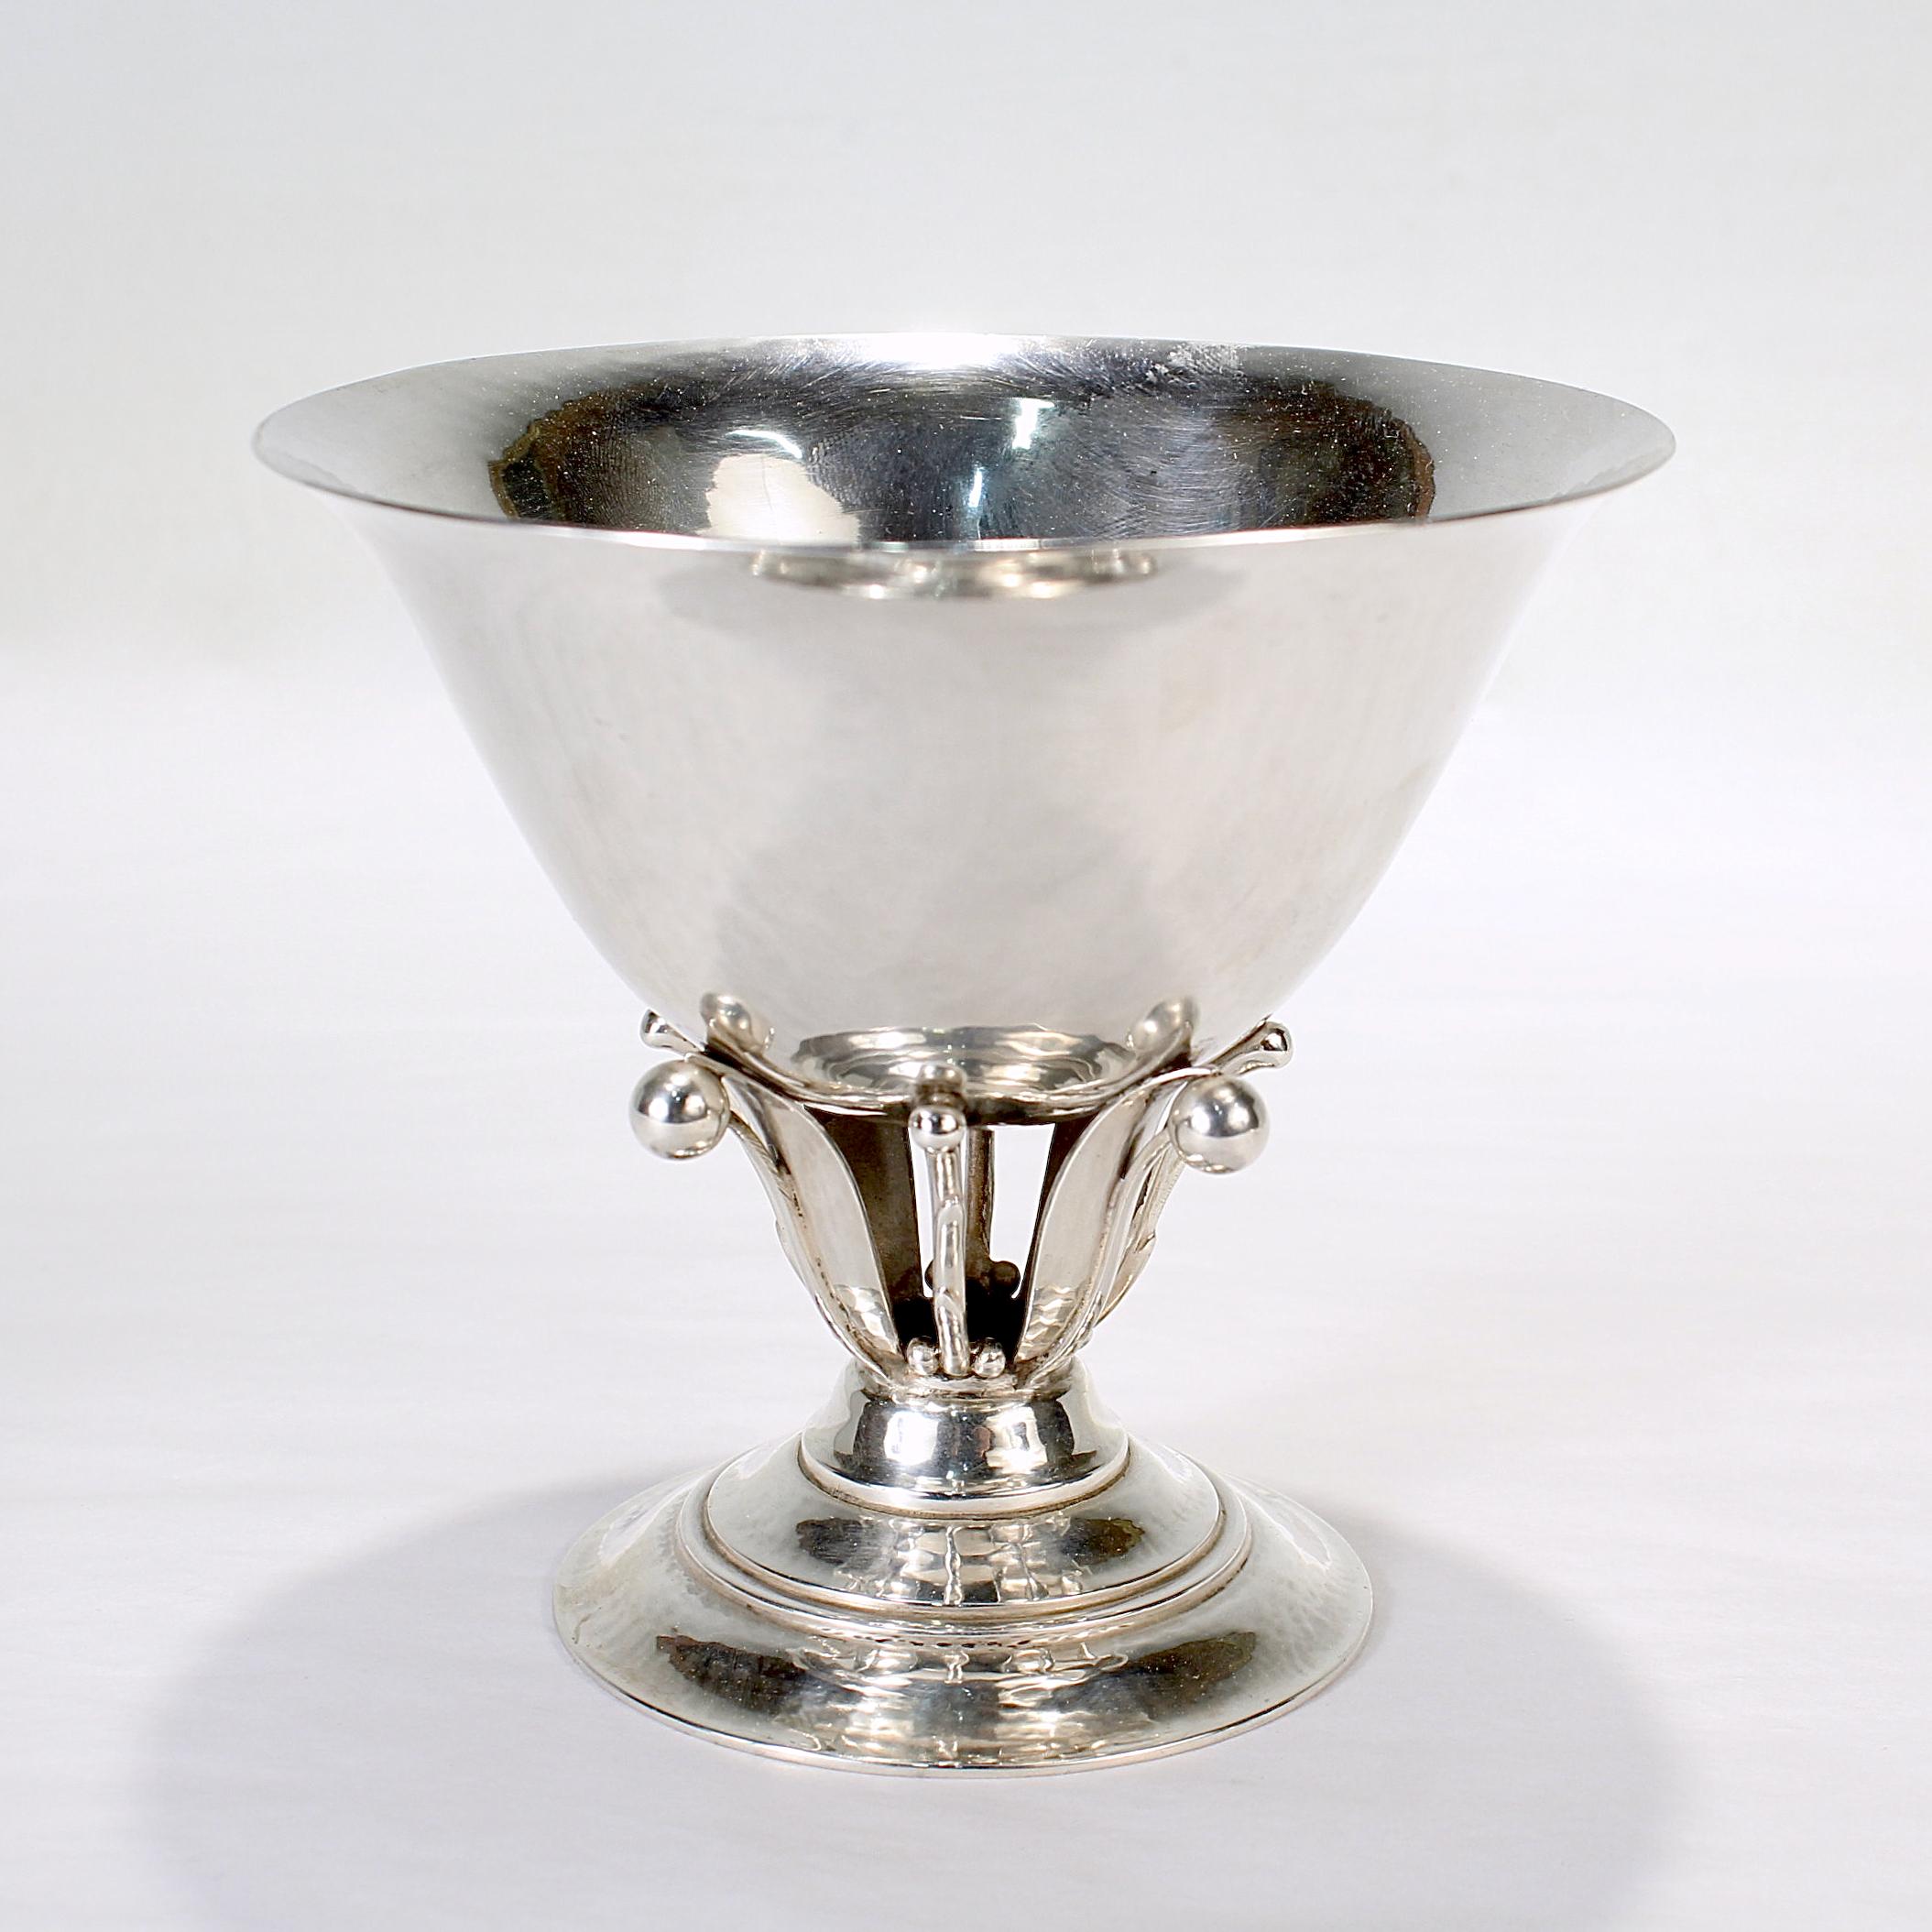 Art Deco Period Georg Jensen Sterling Silver Footed Bowl by Johan Rohde ...